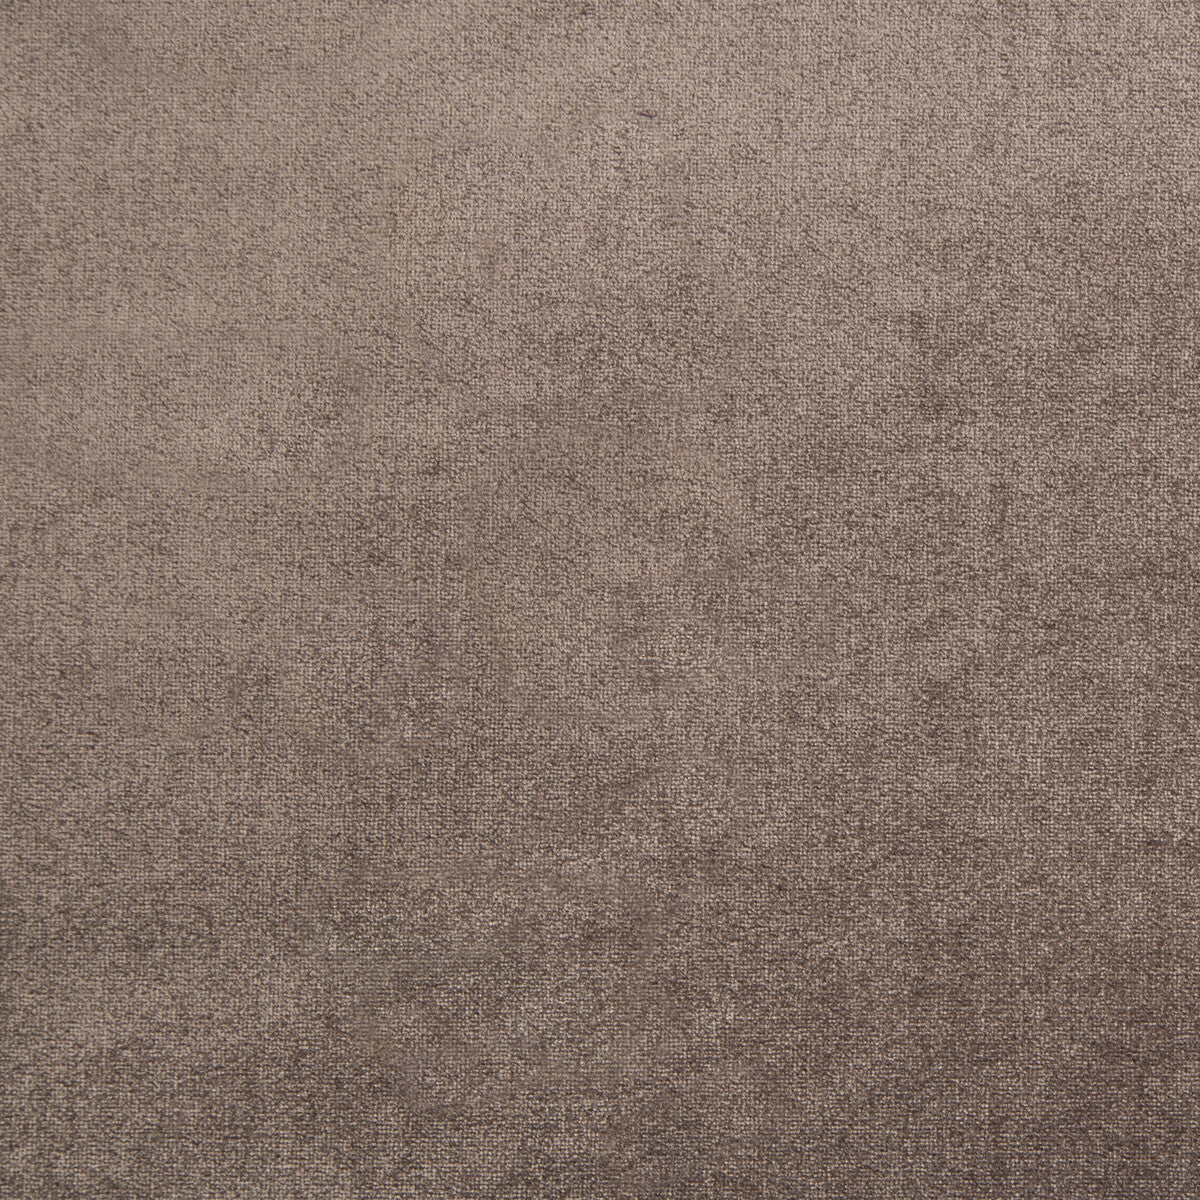 Duchess Velvet fabric in dusty mauve color - pattern 34641.106.0 - by Kravet Couture